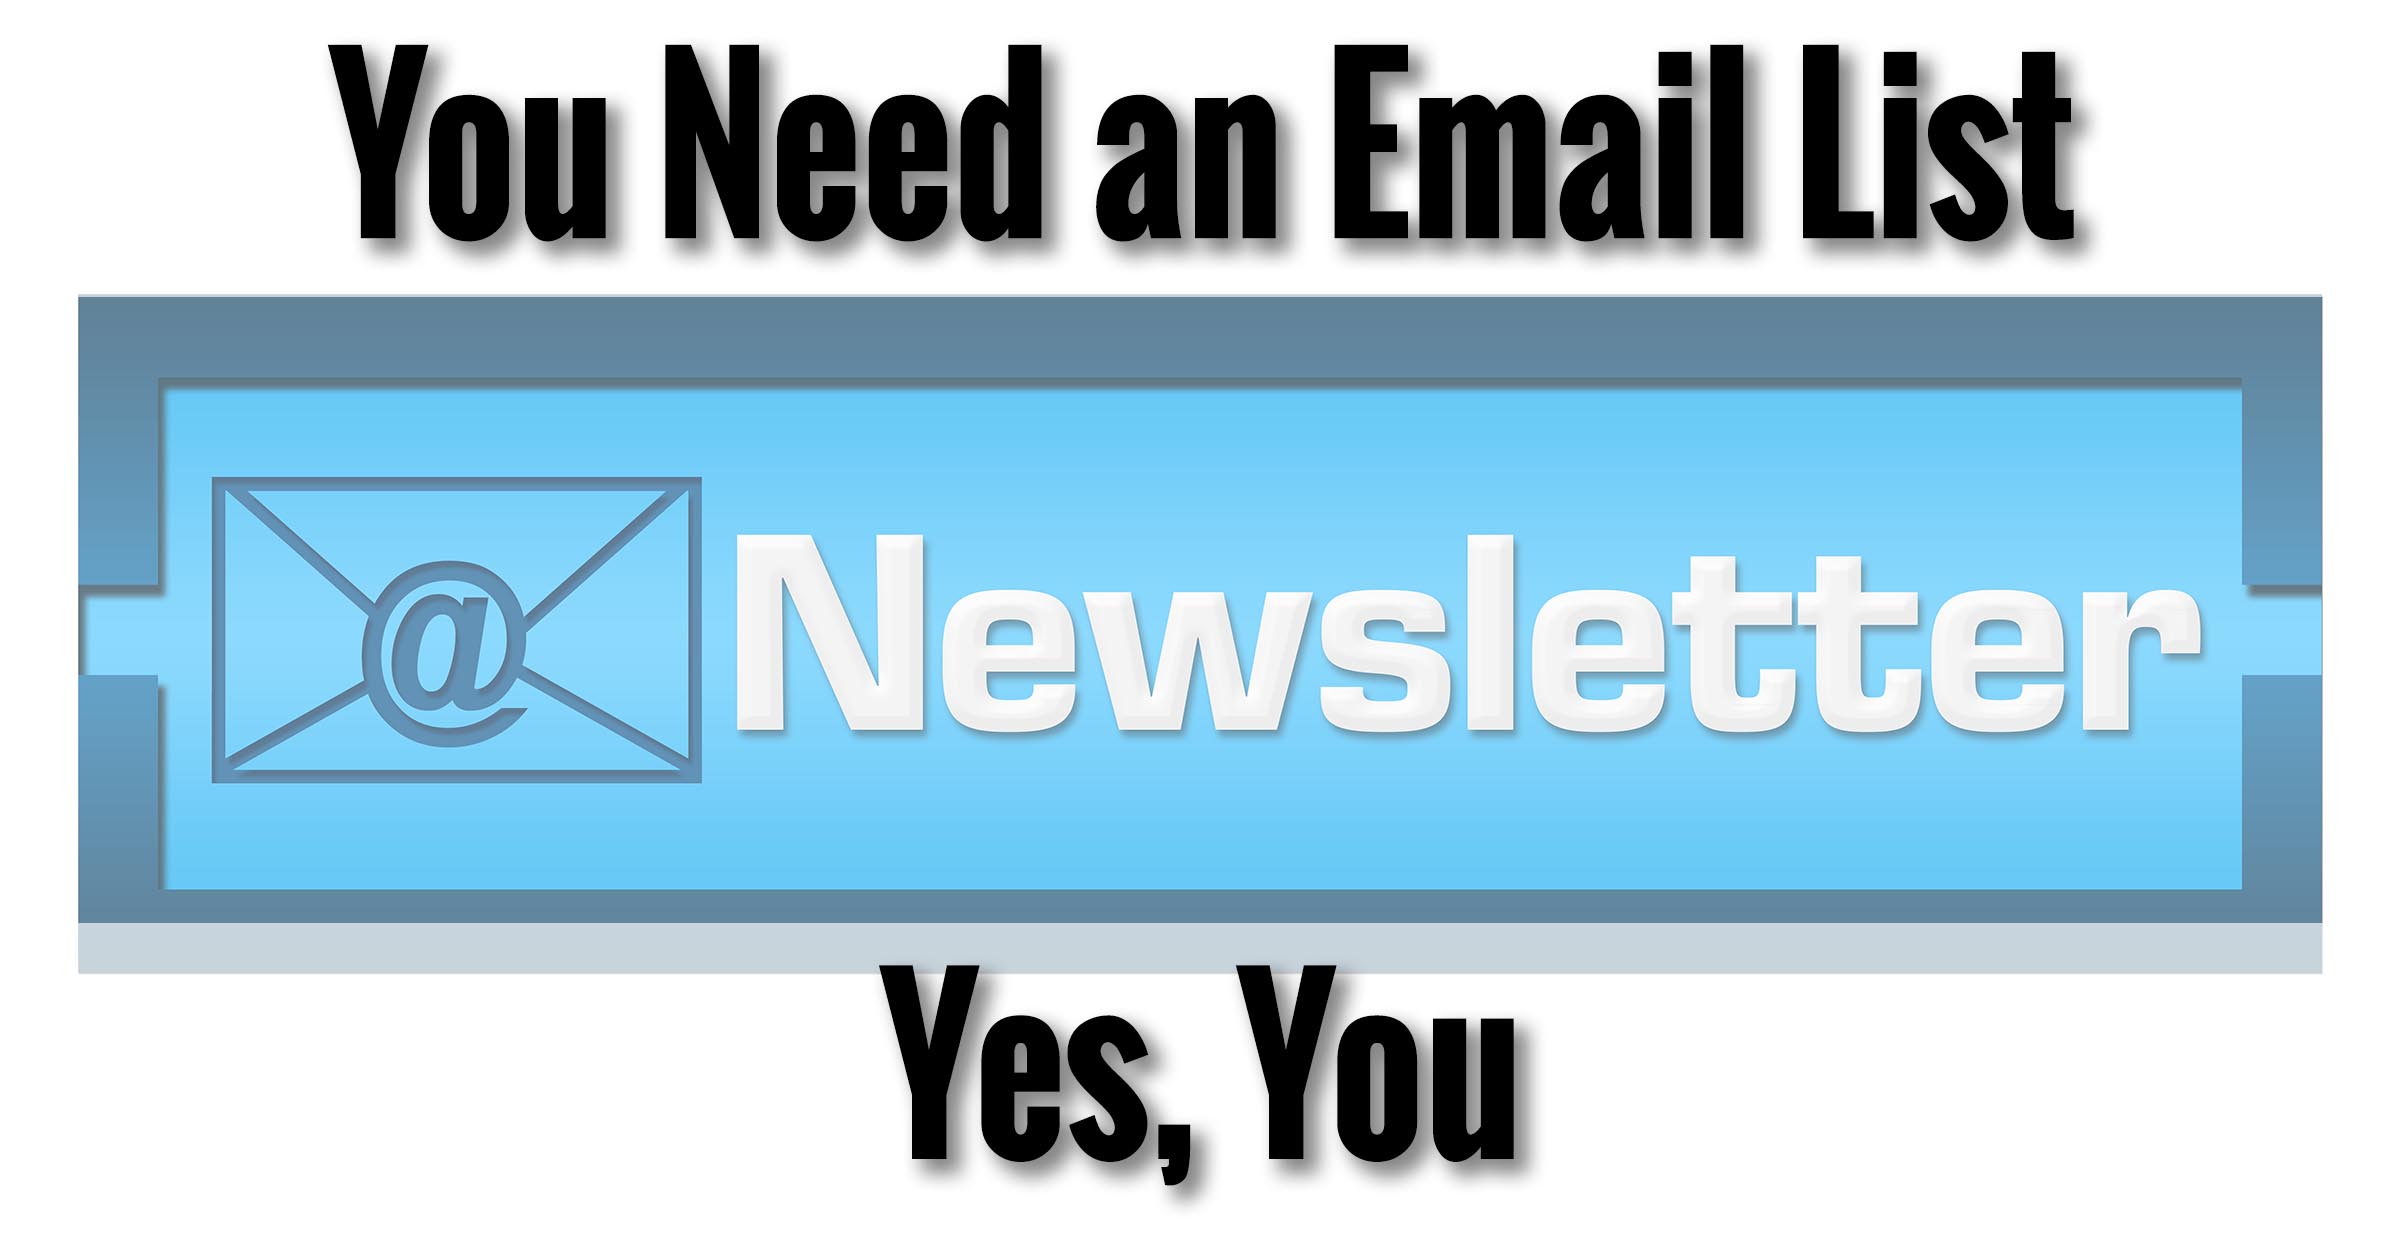 You Need an Email List. Yes, You.